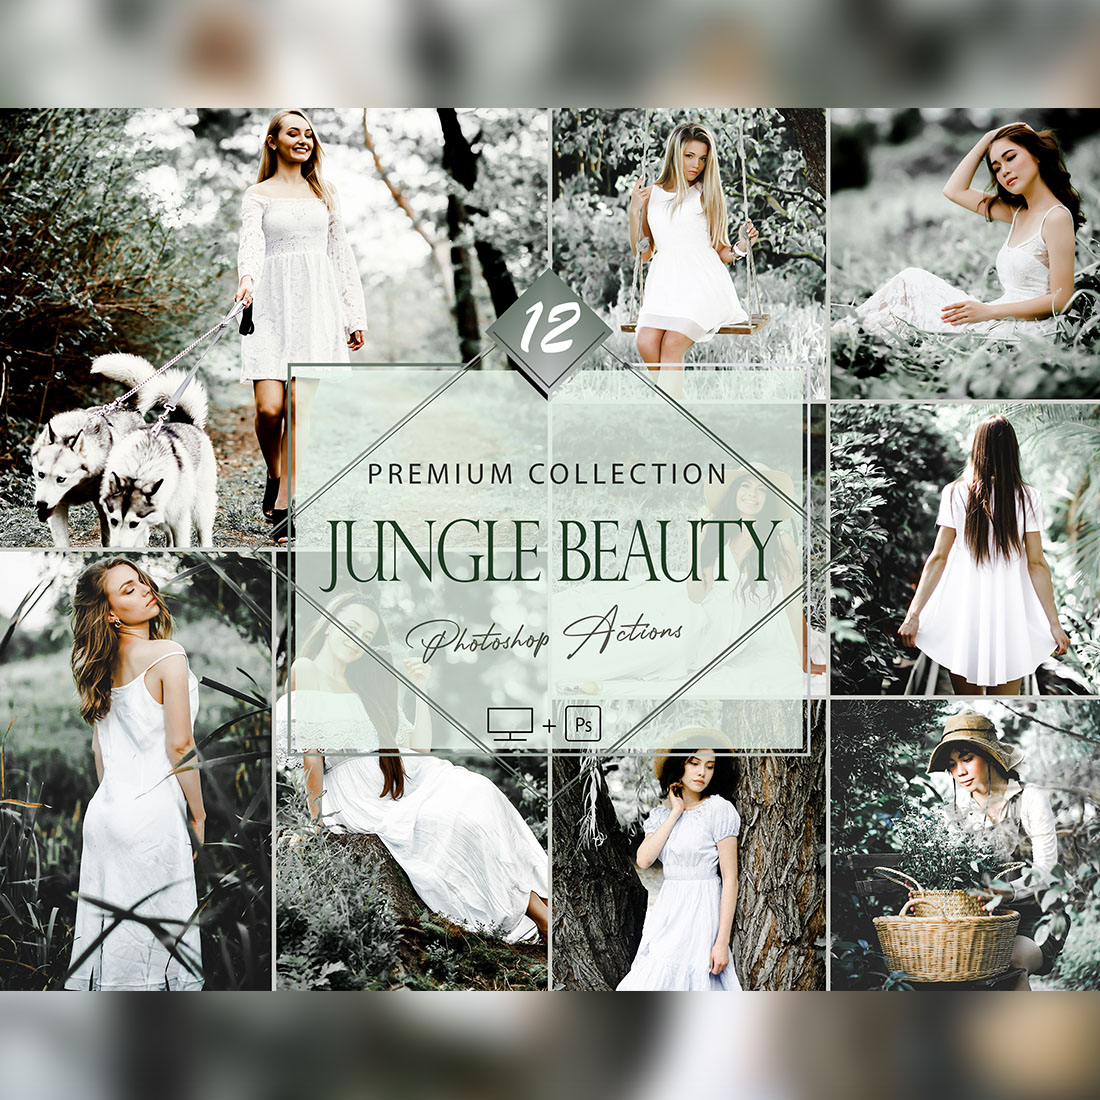 12 Photoshop Actions, Jungle Beauty Ps Action, Forest Cozy ACR Preset, Green Filter, Lifestyle Theme For Instagram, Coastline Offshore, Warm Portrait cover image.